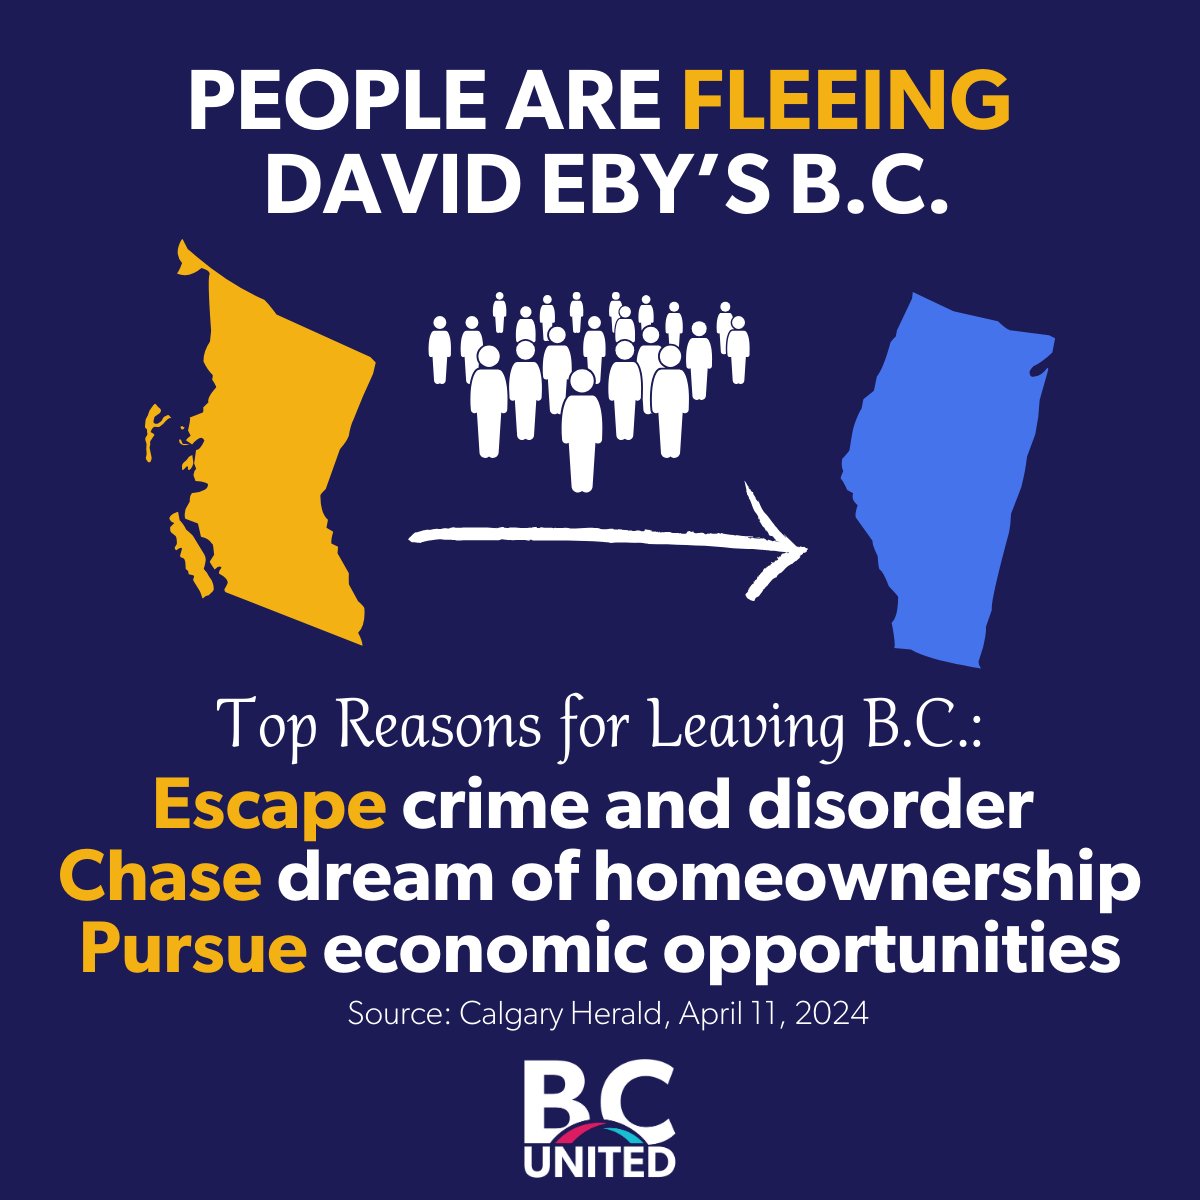 David Eby's failed decriminalization experiment is so bad, British Columbians are fleeing to Alberta. Almost 70,000 people left B.C. for other provinces in 2023. BC United will scrap decriminalization and tackle the crises caused by David Eby's NDP.